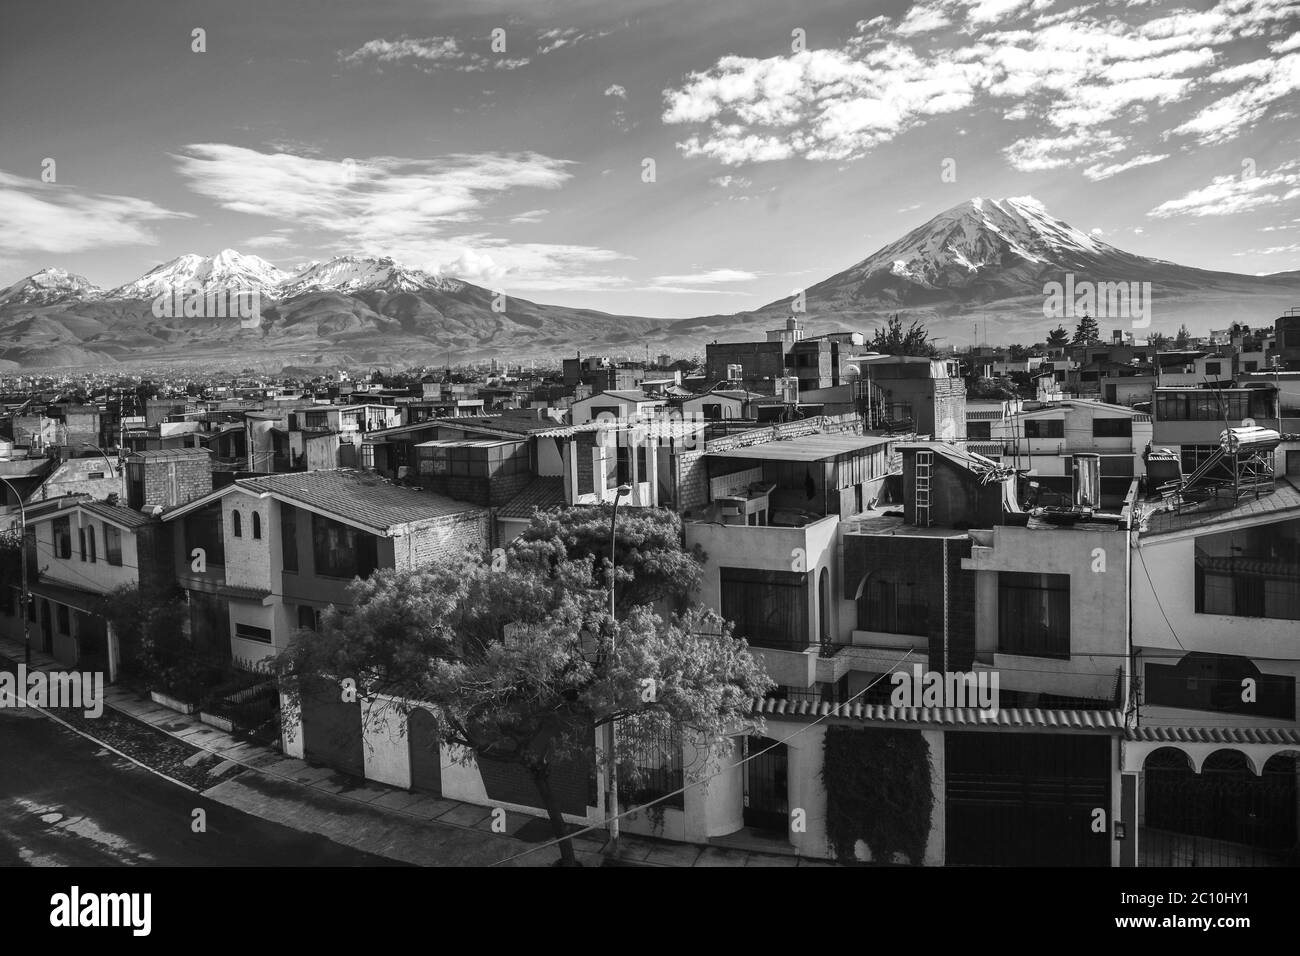 City of Arequipa with its iconic active volcanos of Misti and Chachani, Peru Stock Photo